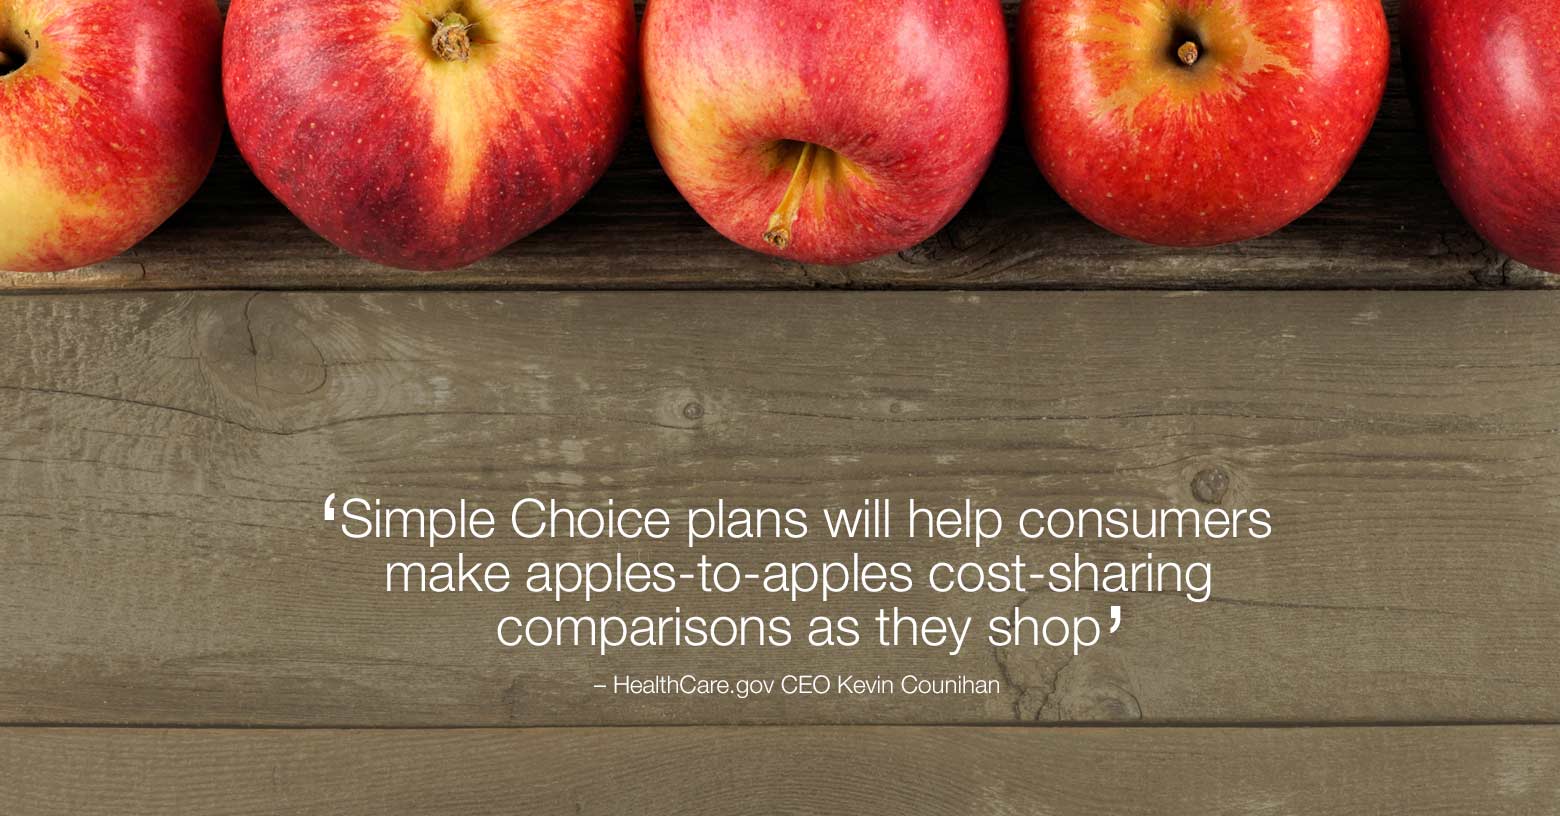 Will Simple Choice plans live up to their name?